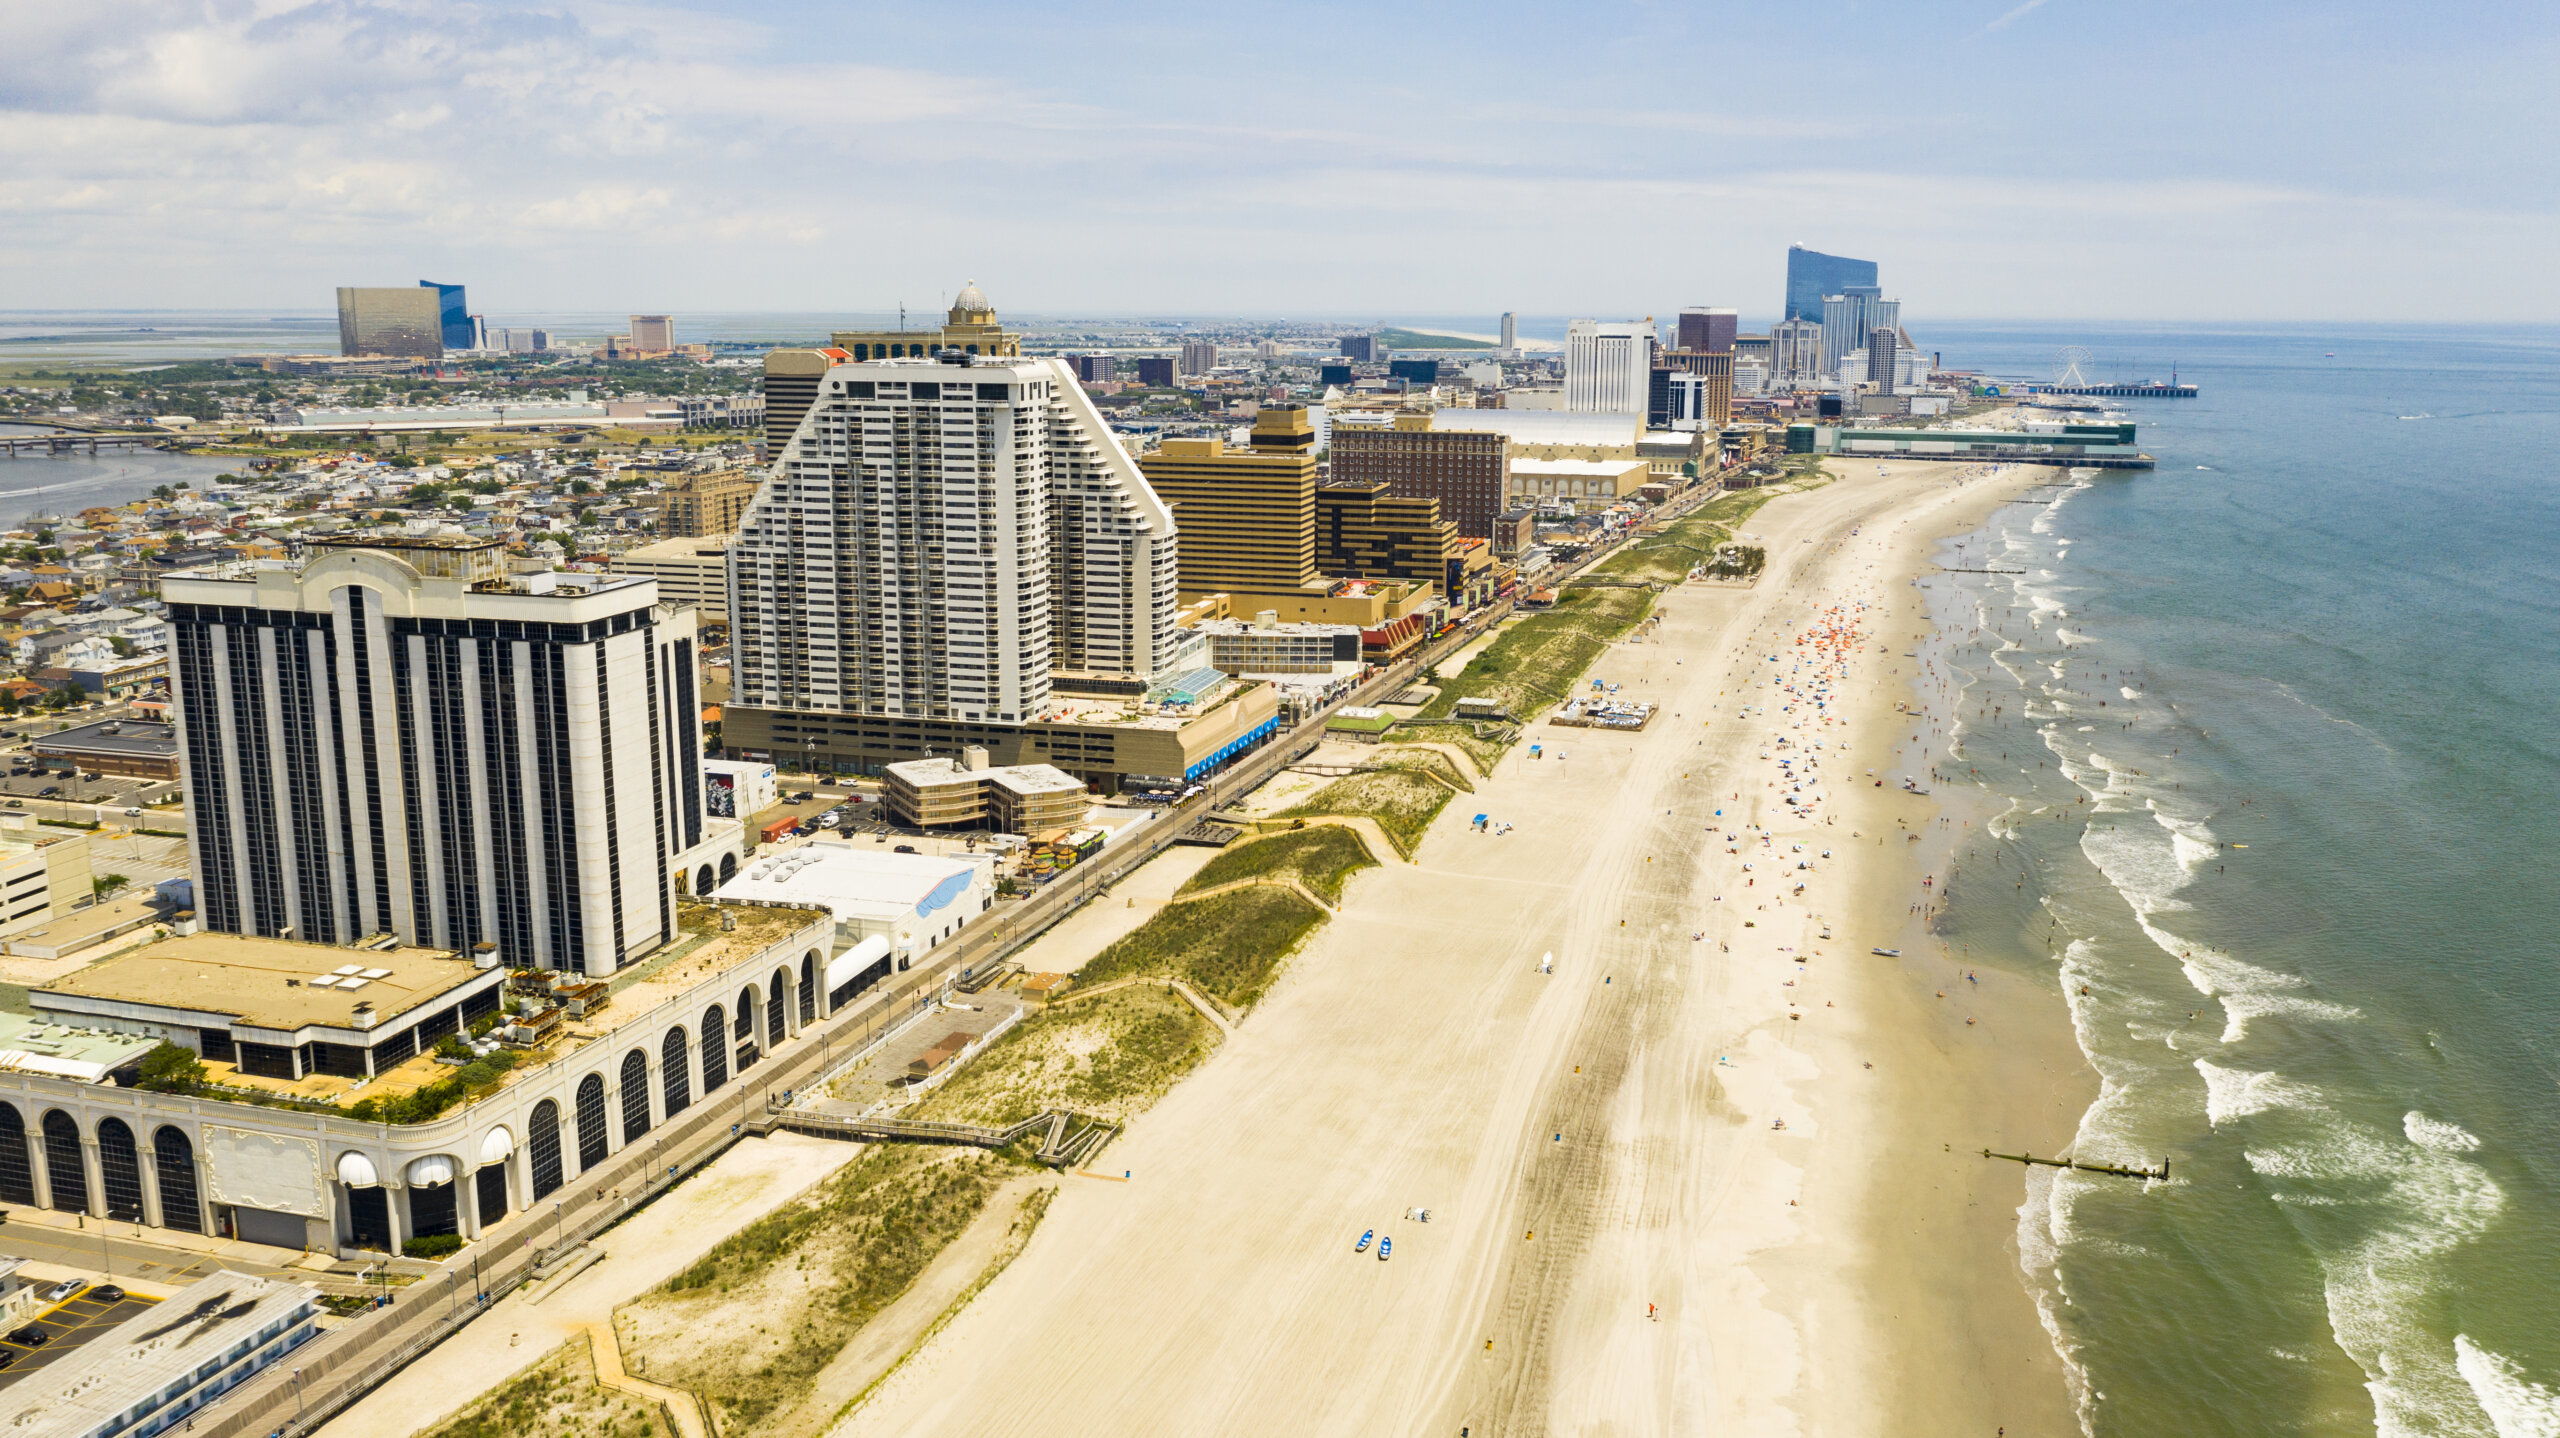 There are plenty of exciting reasons to escape to Atlantic City